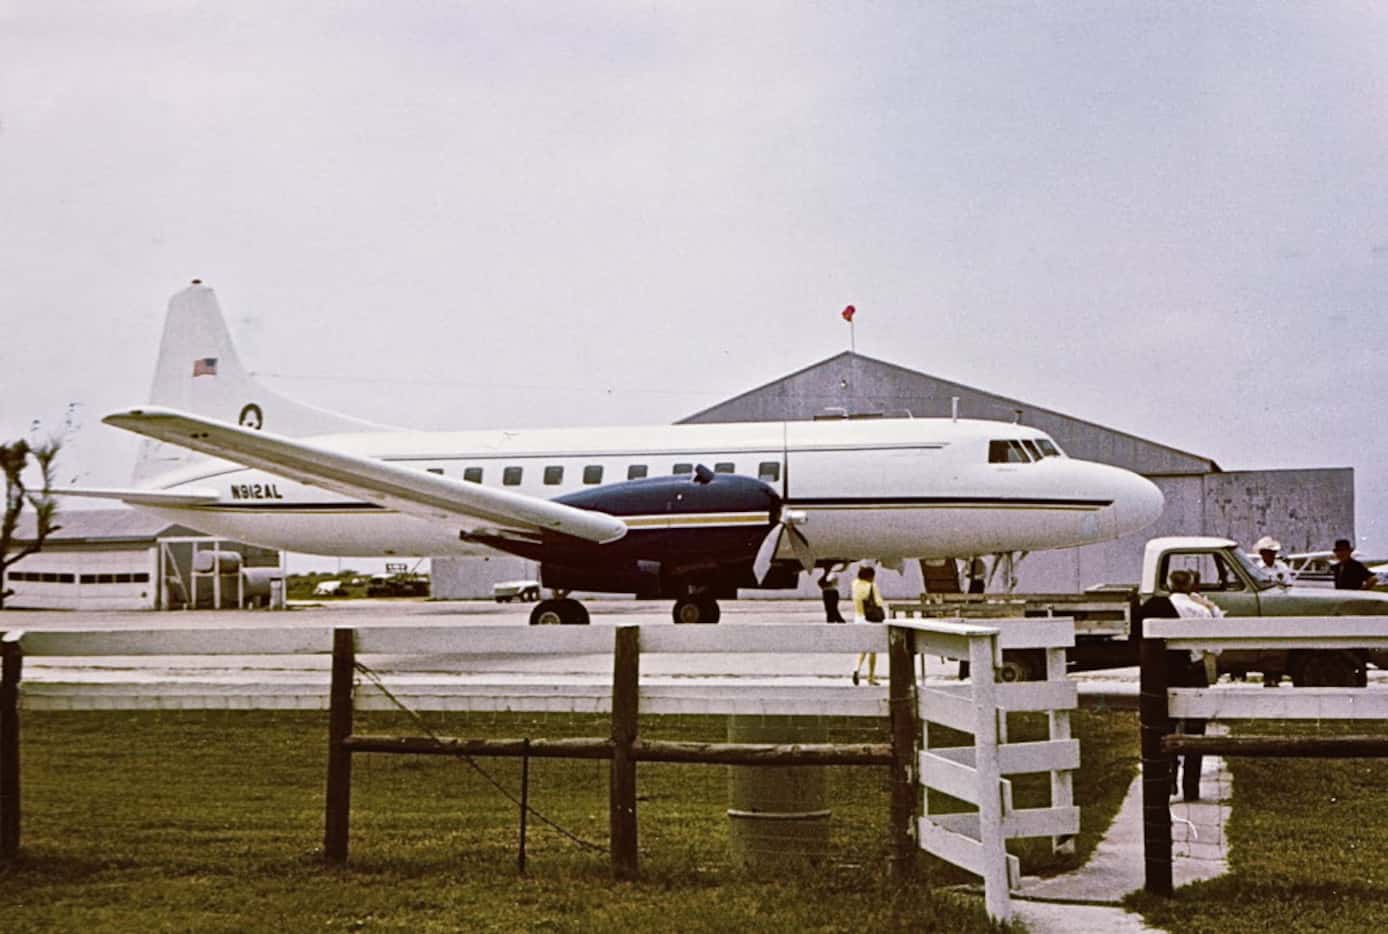 Dallas oilman Toddie Lee Wynne's private Convair transported him to and from his Matagorda...